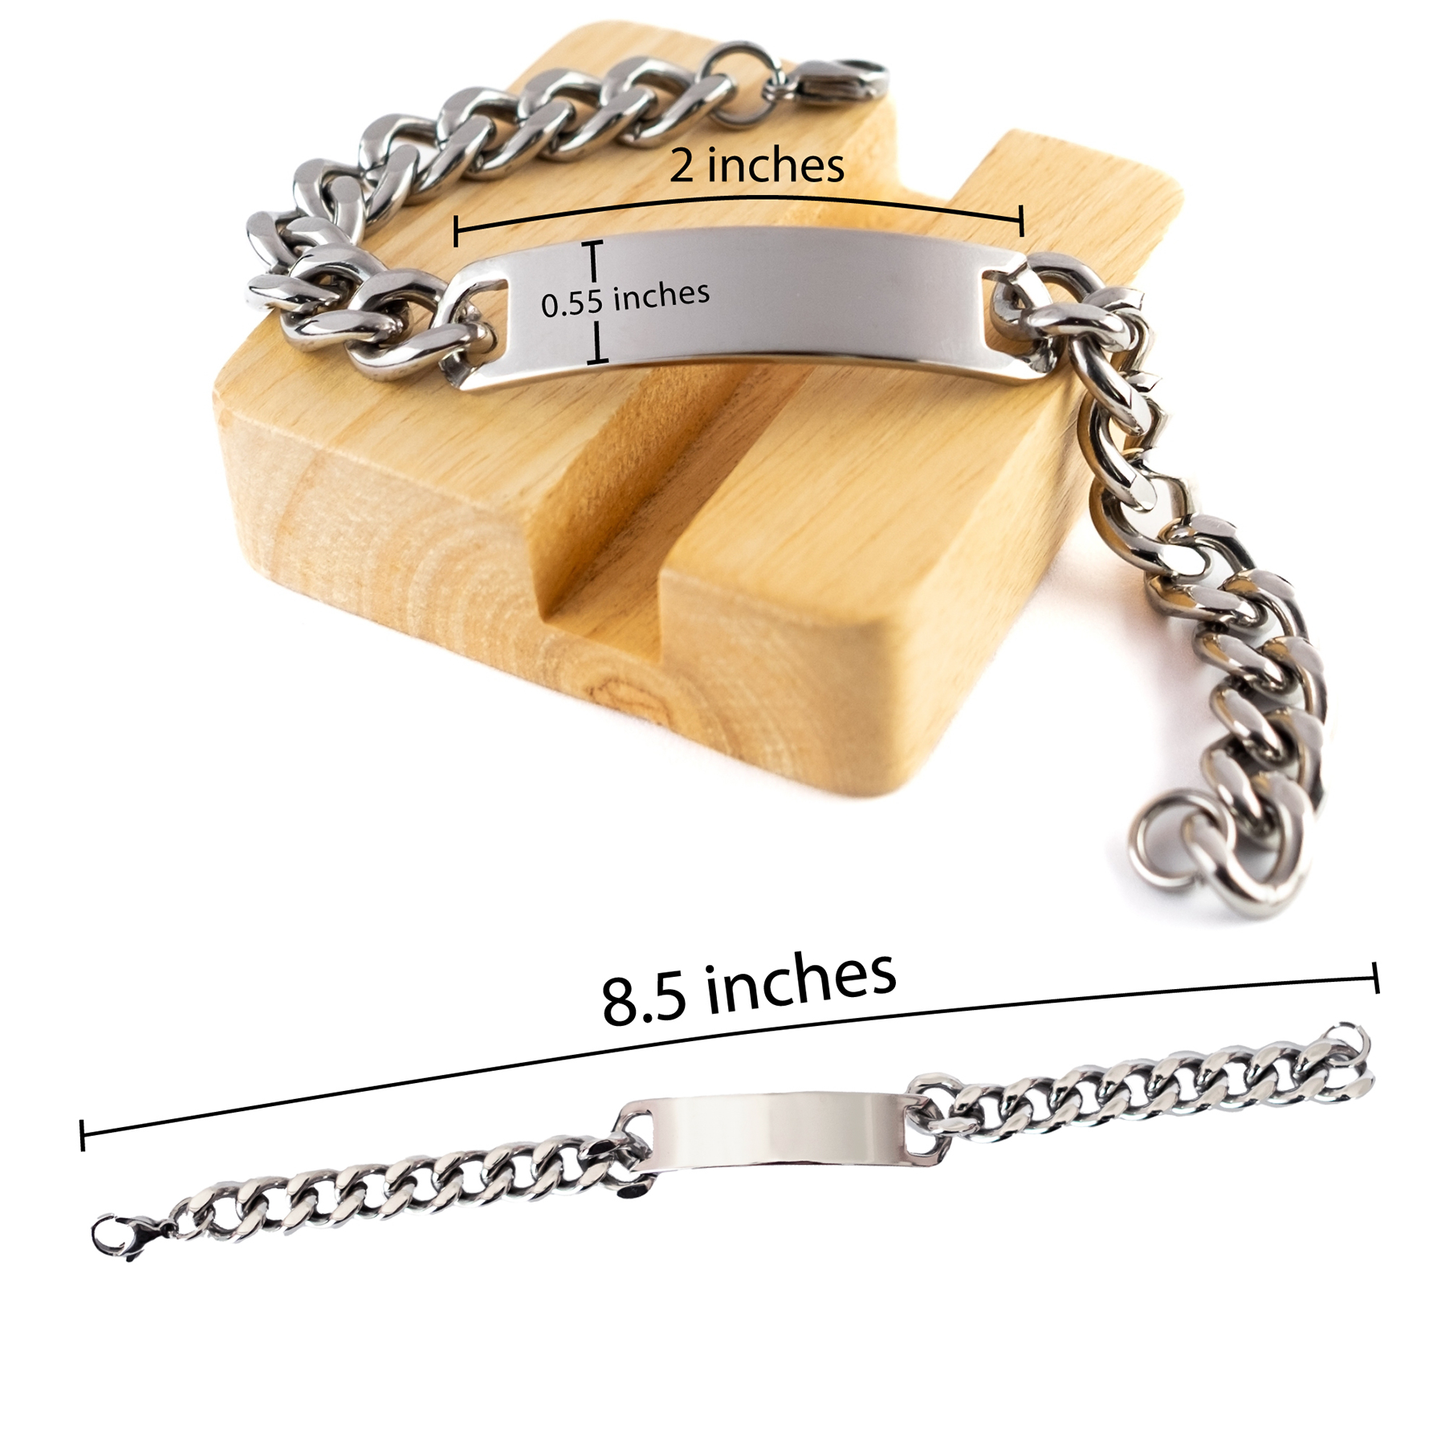 Grandfather Cuban Chain Stainless Steel Bracelet Engraved with Special Place in Heart for Birthday, Christmas, and Graduation Gifts